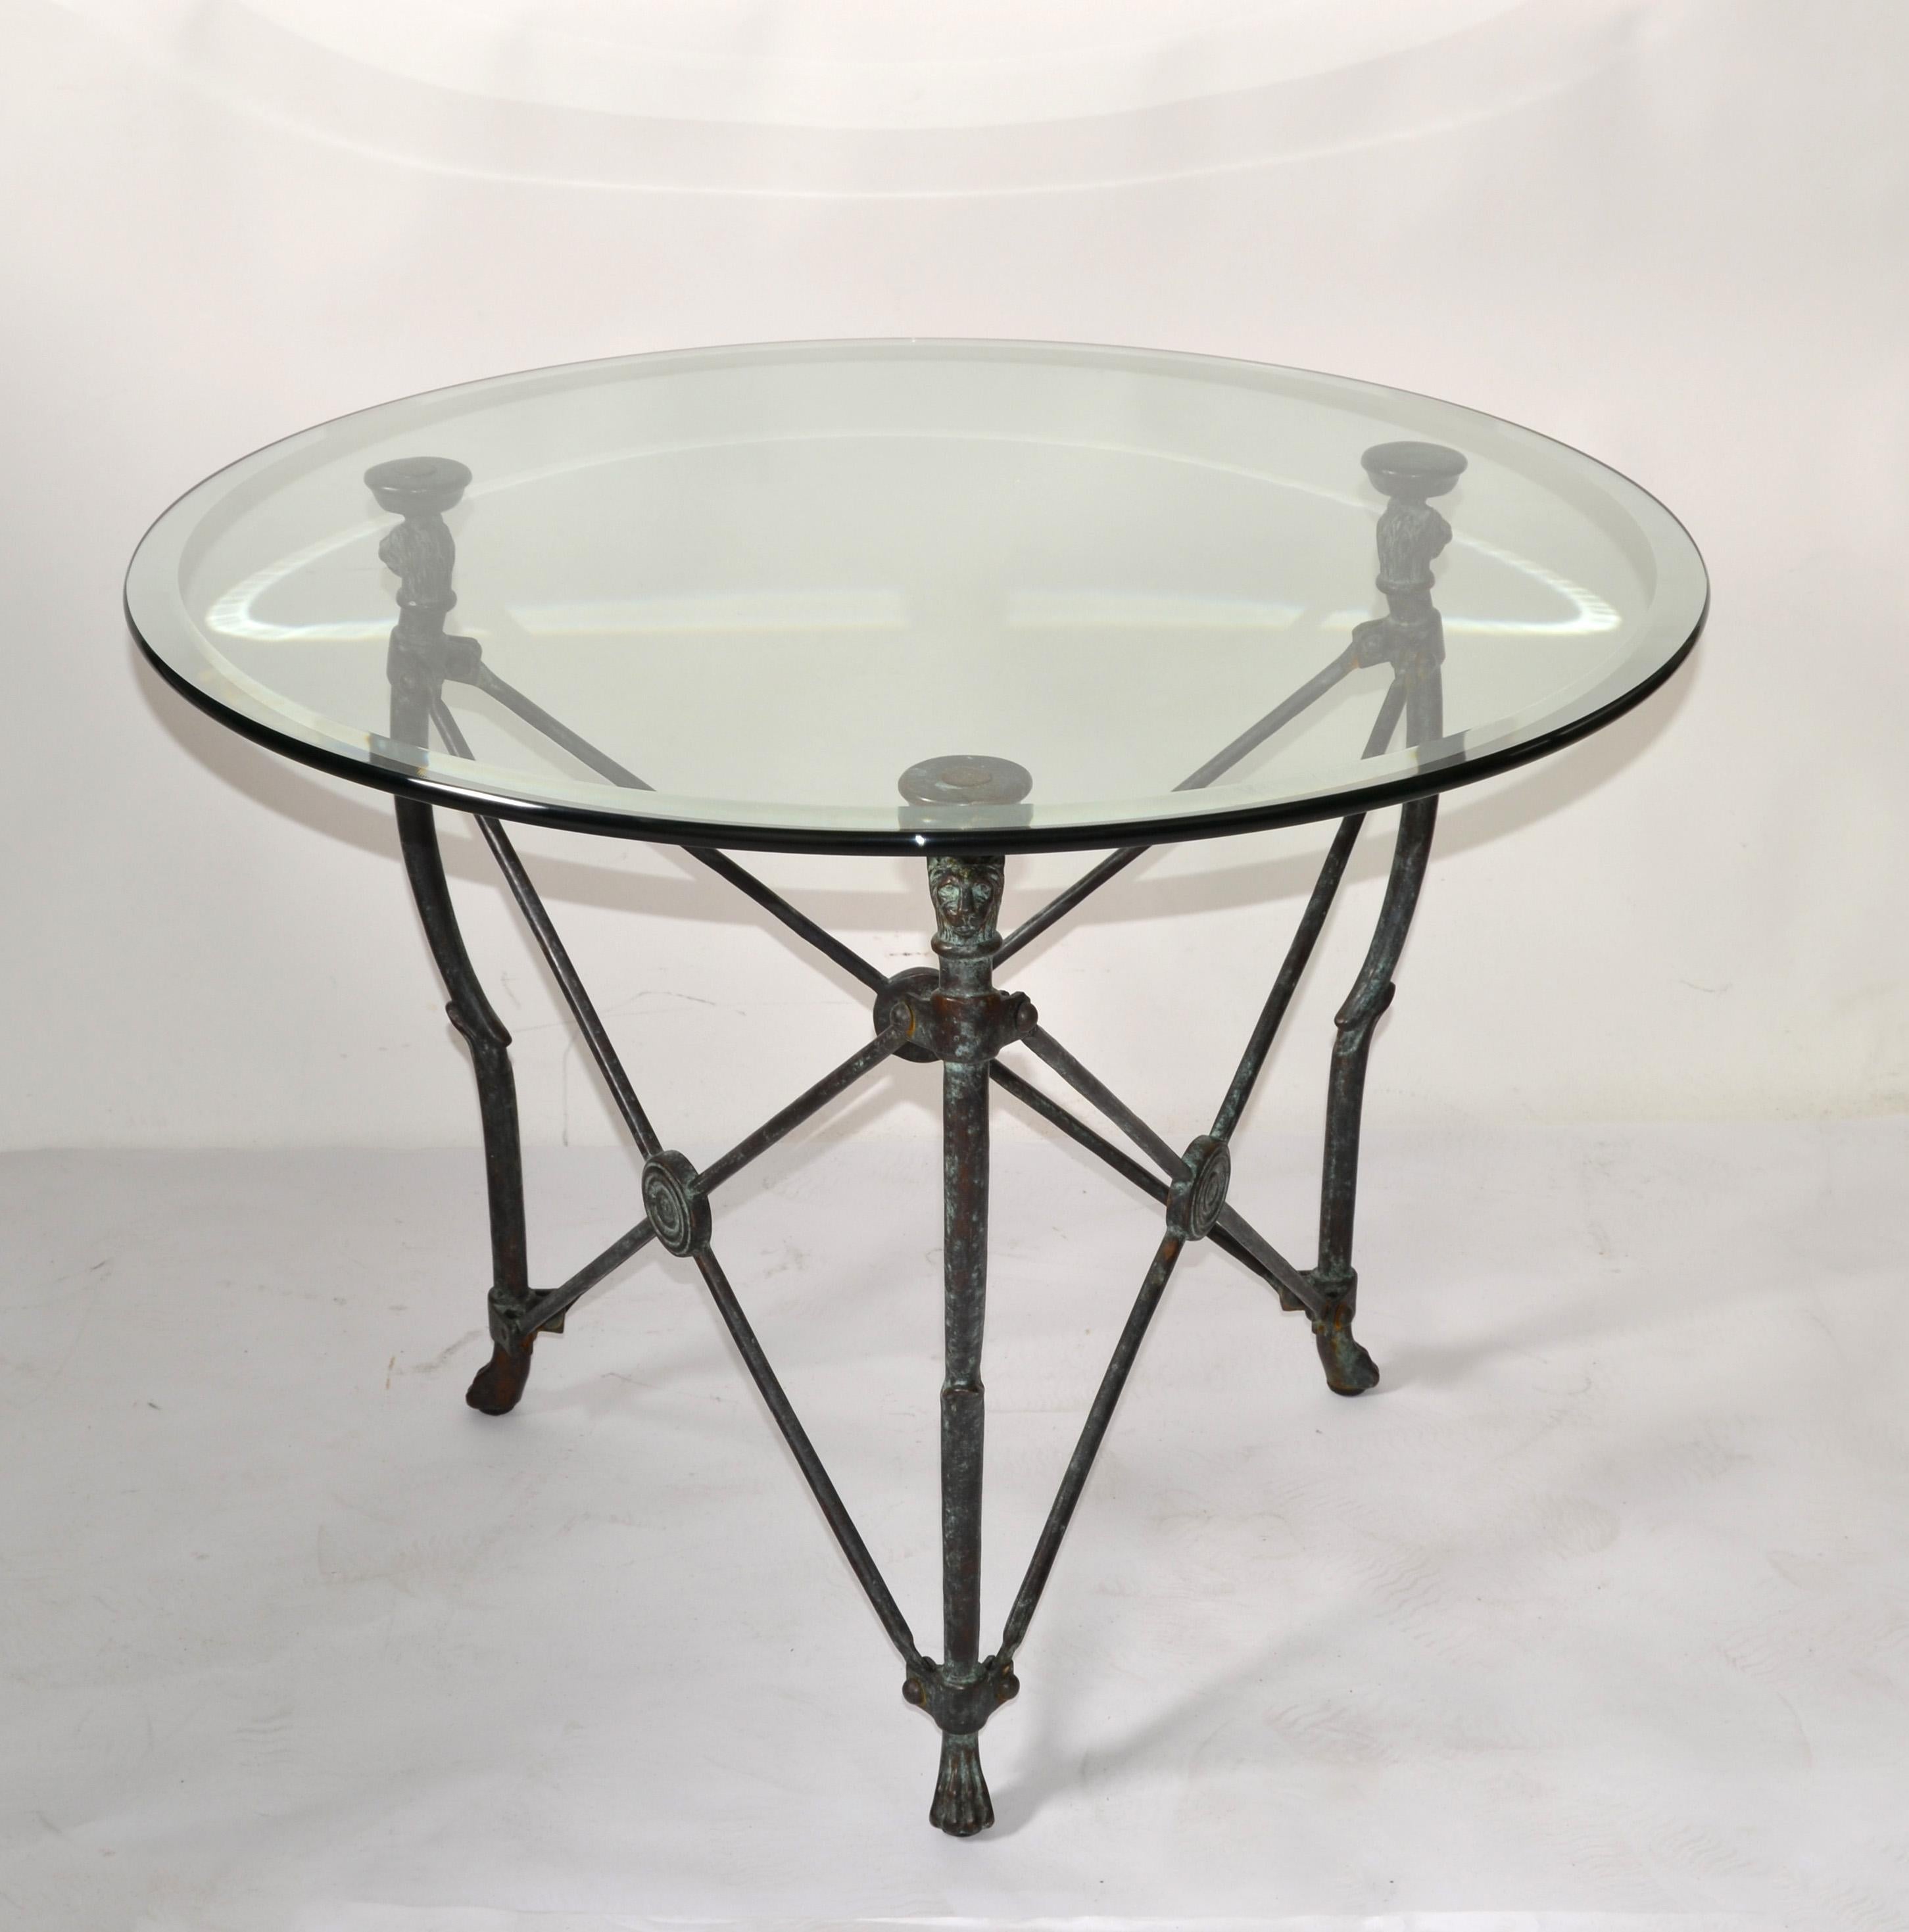 Italian round Neoclassical solid Bronze Accent, End or Side Table designed in the manner of Diego Giacometti and made in Italy the late 20th Century. 
This beautiful Accent table is supported by three decorated bronze legs that have bronze lion